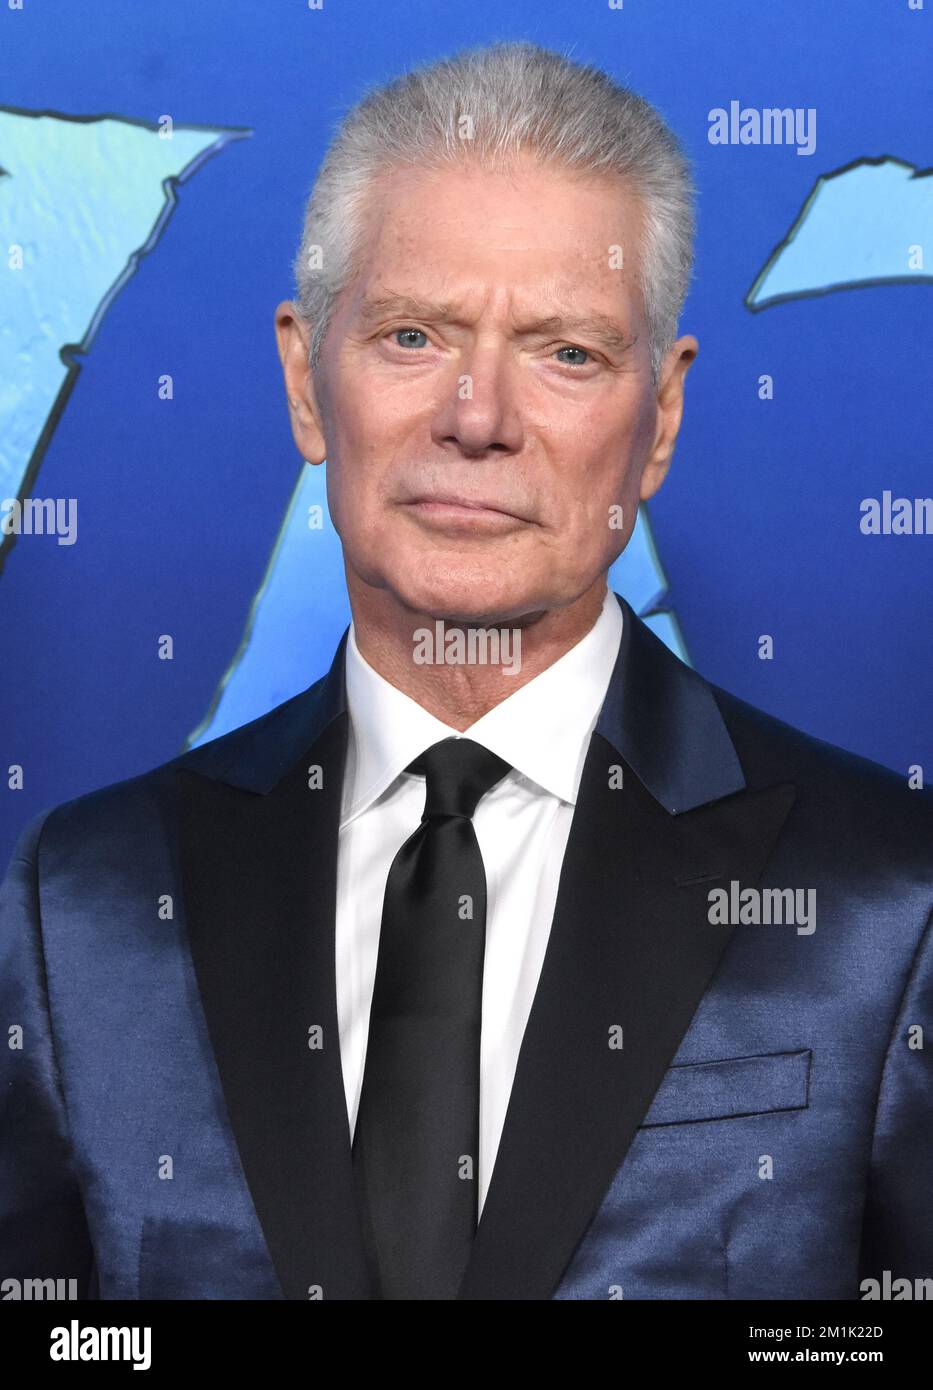 Hollywood, California, USA 12th December 2022 Actor Stephen Lang attends  20th Century Studio's 'Avatar 2: The Way of Water' U.S. Premiere at Dolby  Theatre on December 12, 2022 in Hollywood, California, USA.